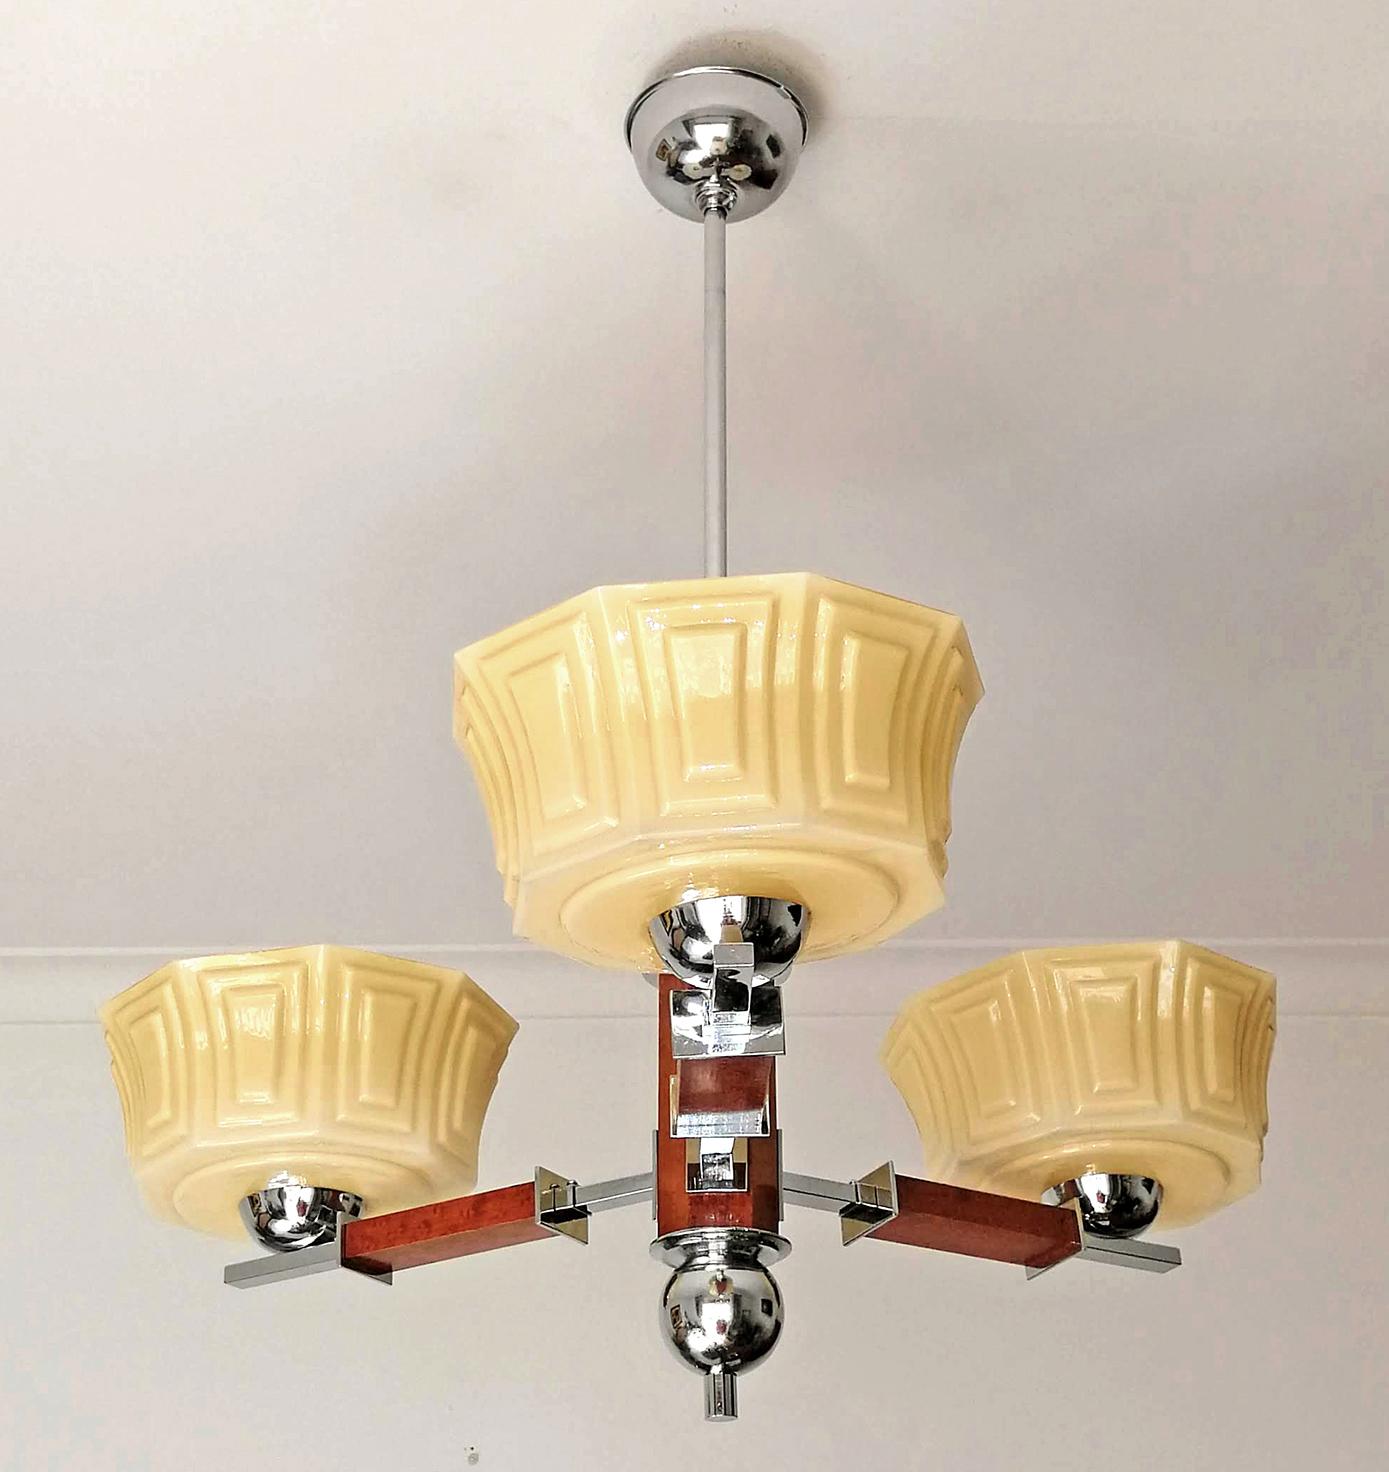 Bauhaus French Art Deco Opaline Amber Glass Shades Chrome and Wood Chandelier For Sale 1